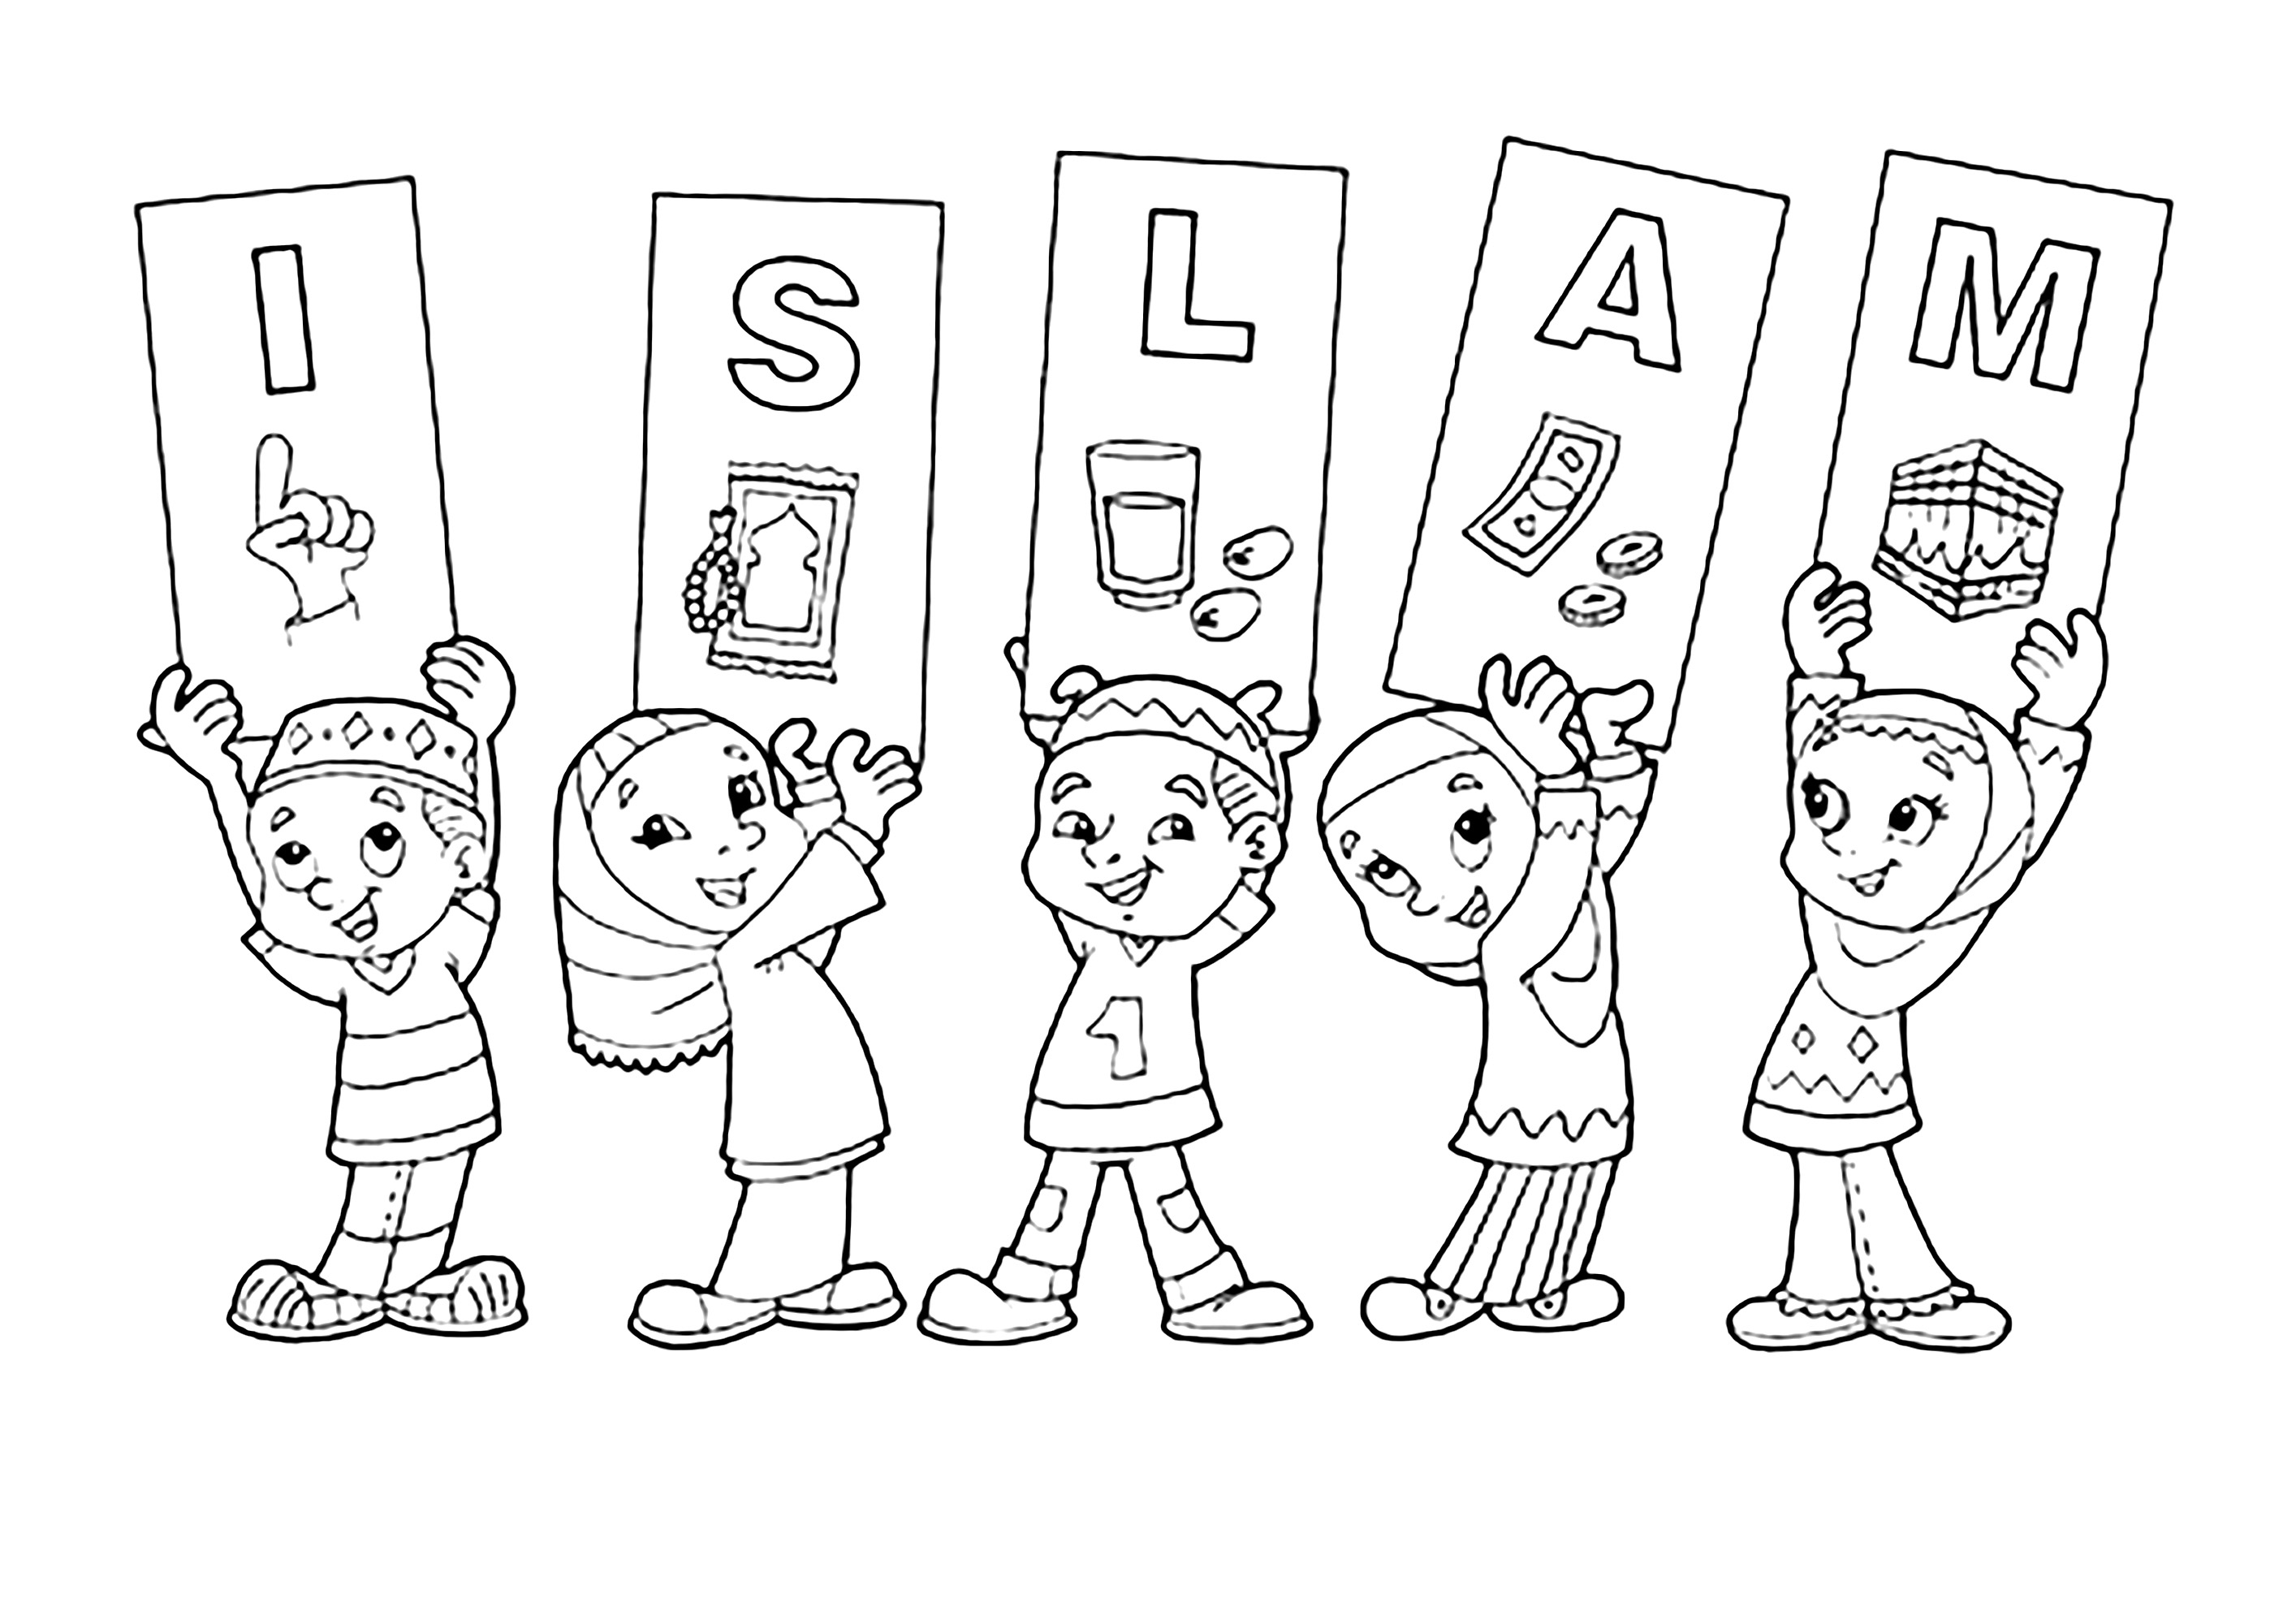 Children with 'ISLAM' signs